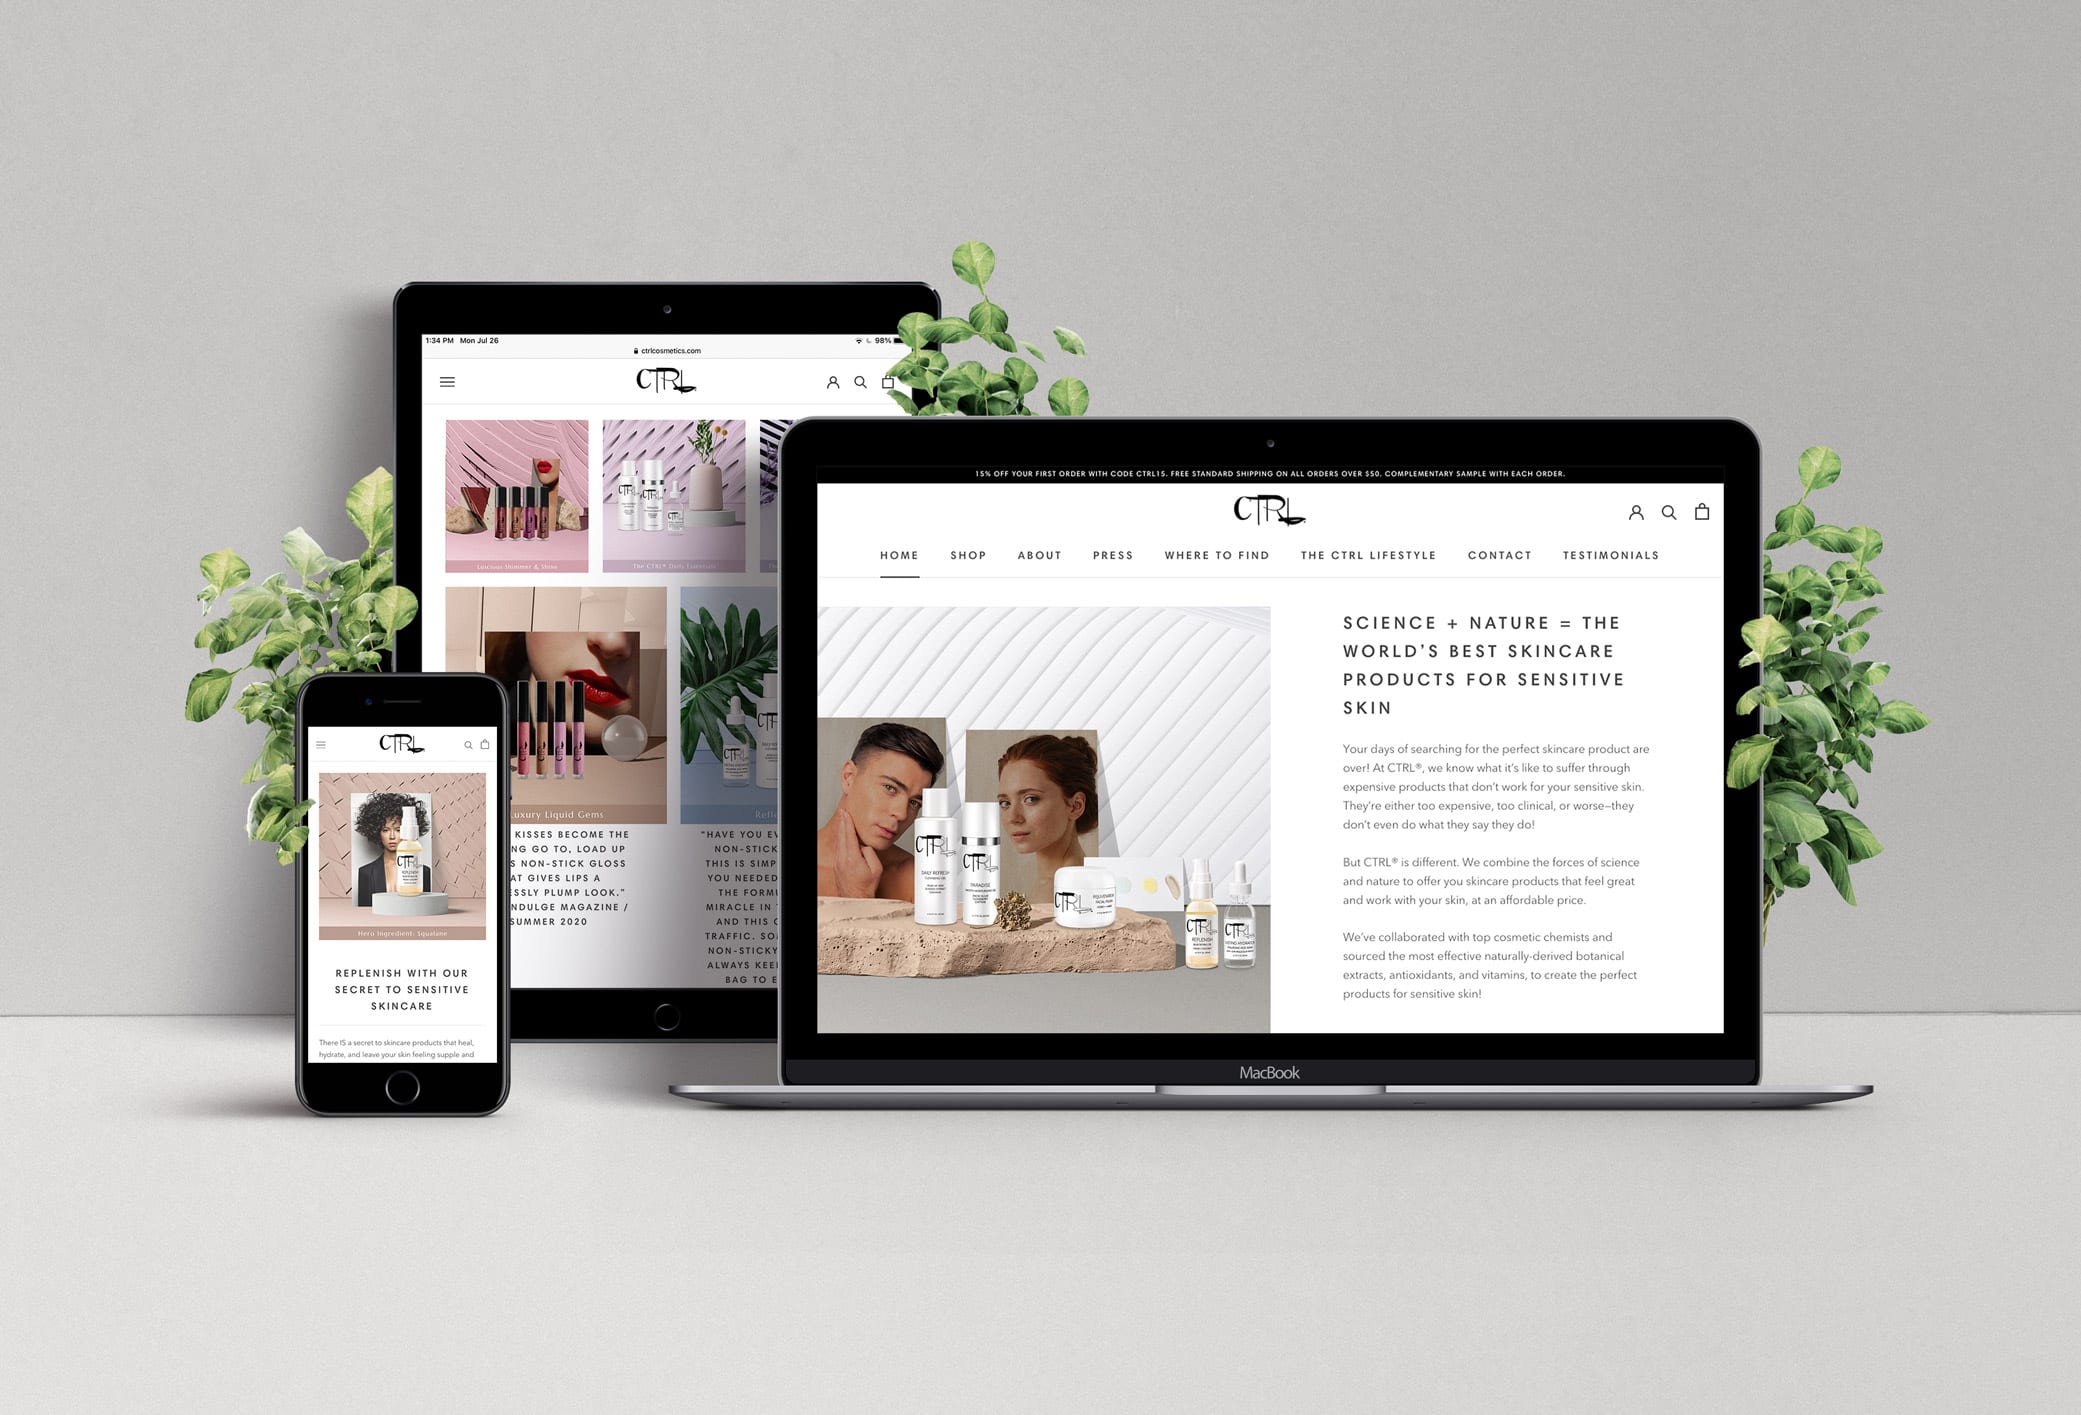 CTRL Cosmetics website featuring different views of their site homepage on an iPad, iMac and iPhone.